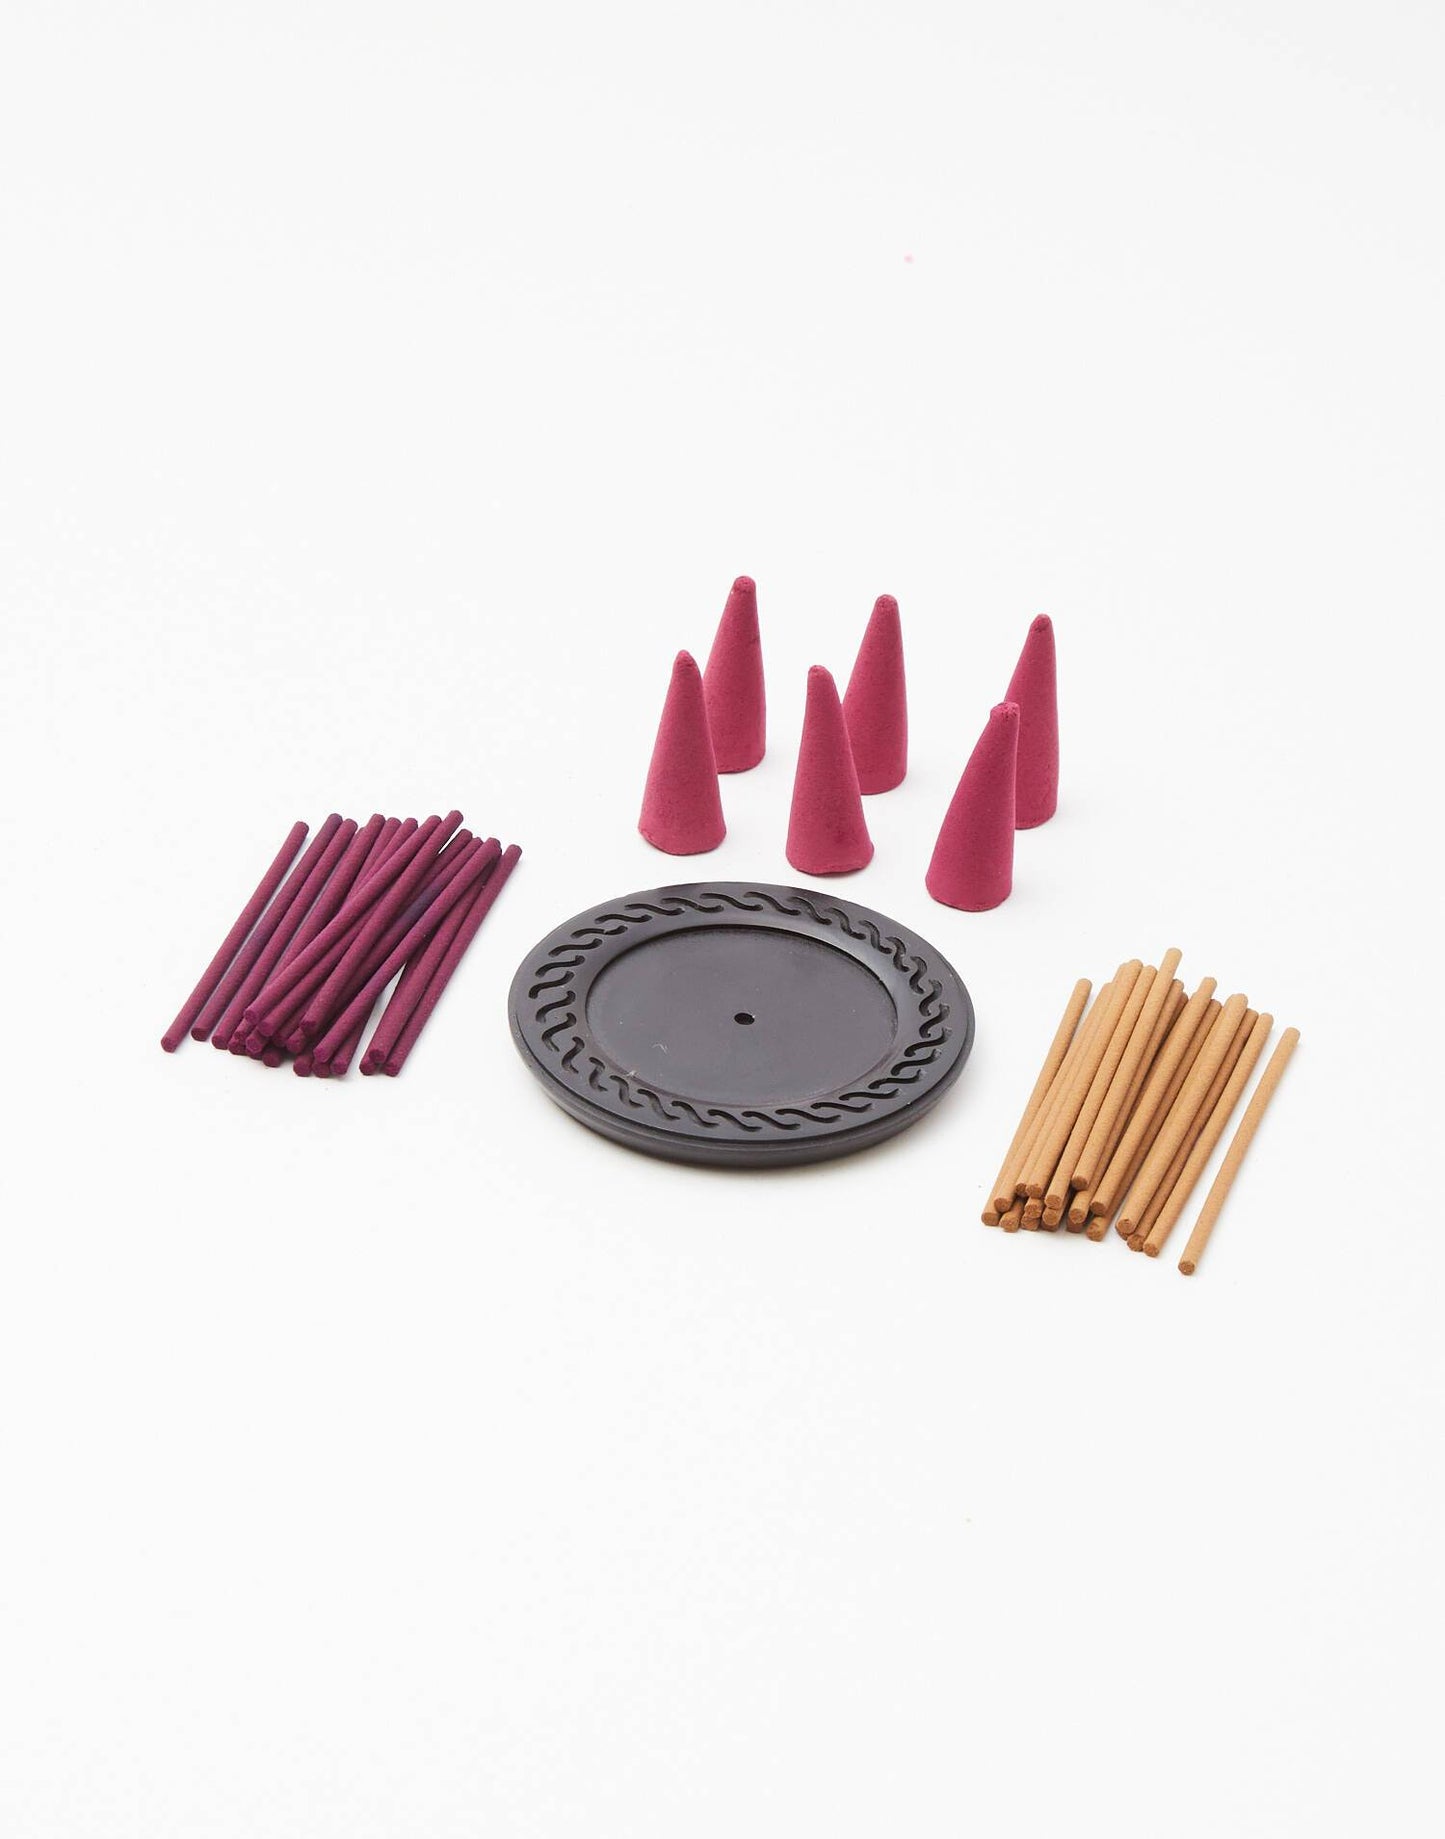 Incense set, cones and incense